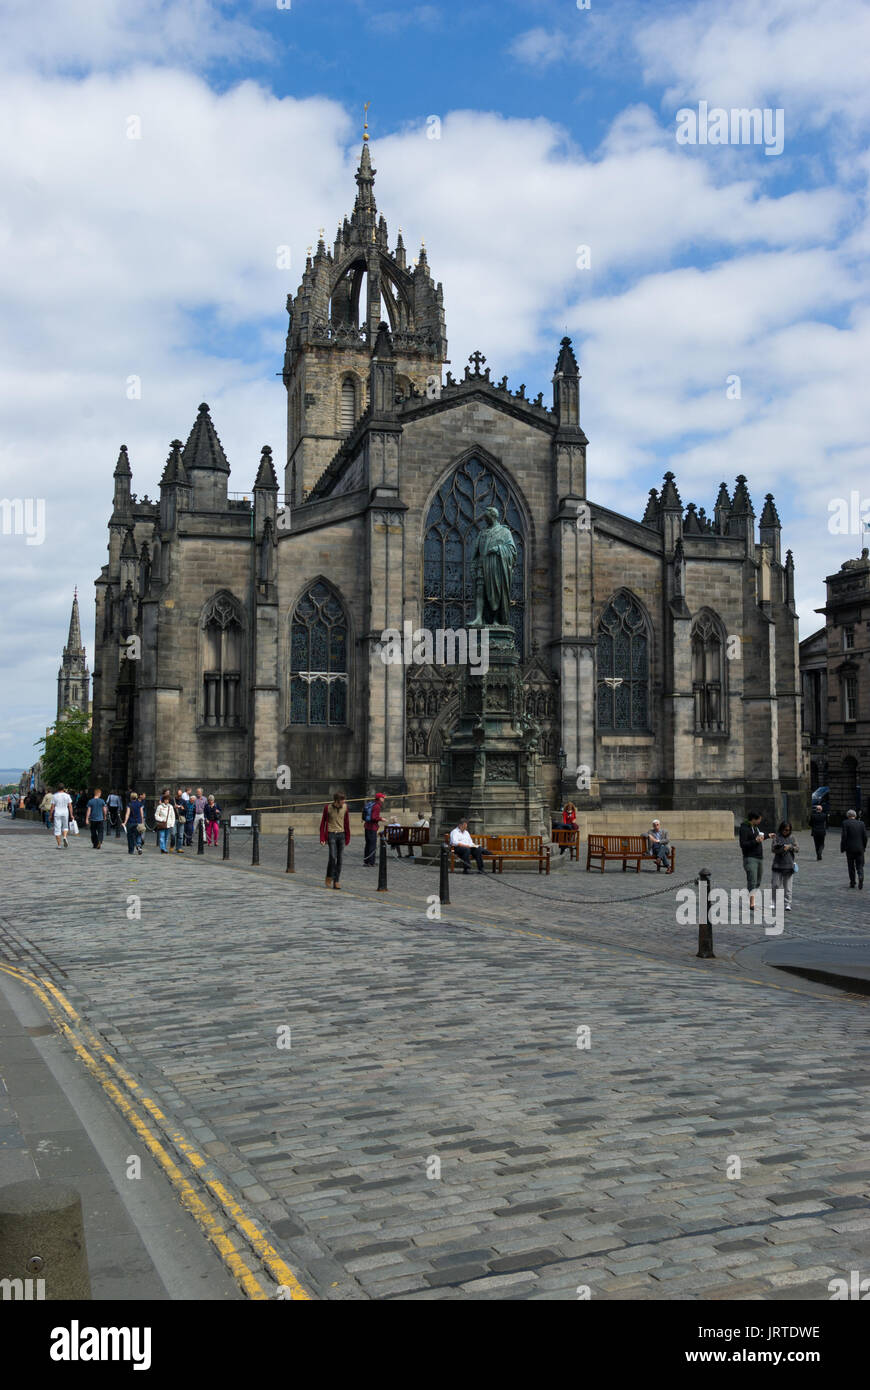 St Giles' Cathedral, also known as the High Kirk of Edinburgh, is the principal place of worship of the Church of Scotland in Edinburgh. Stock Photo